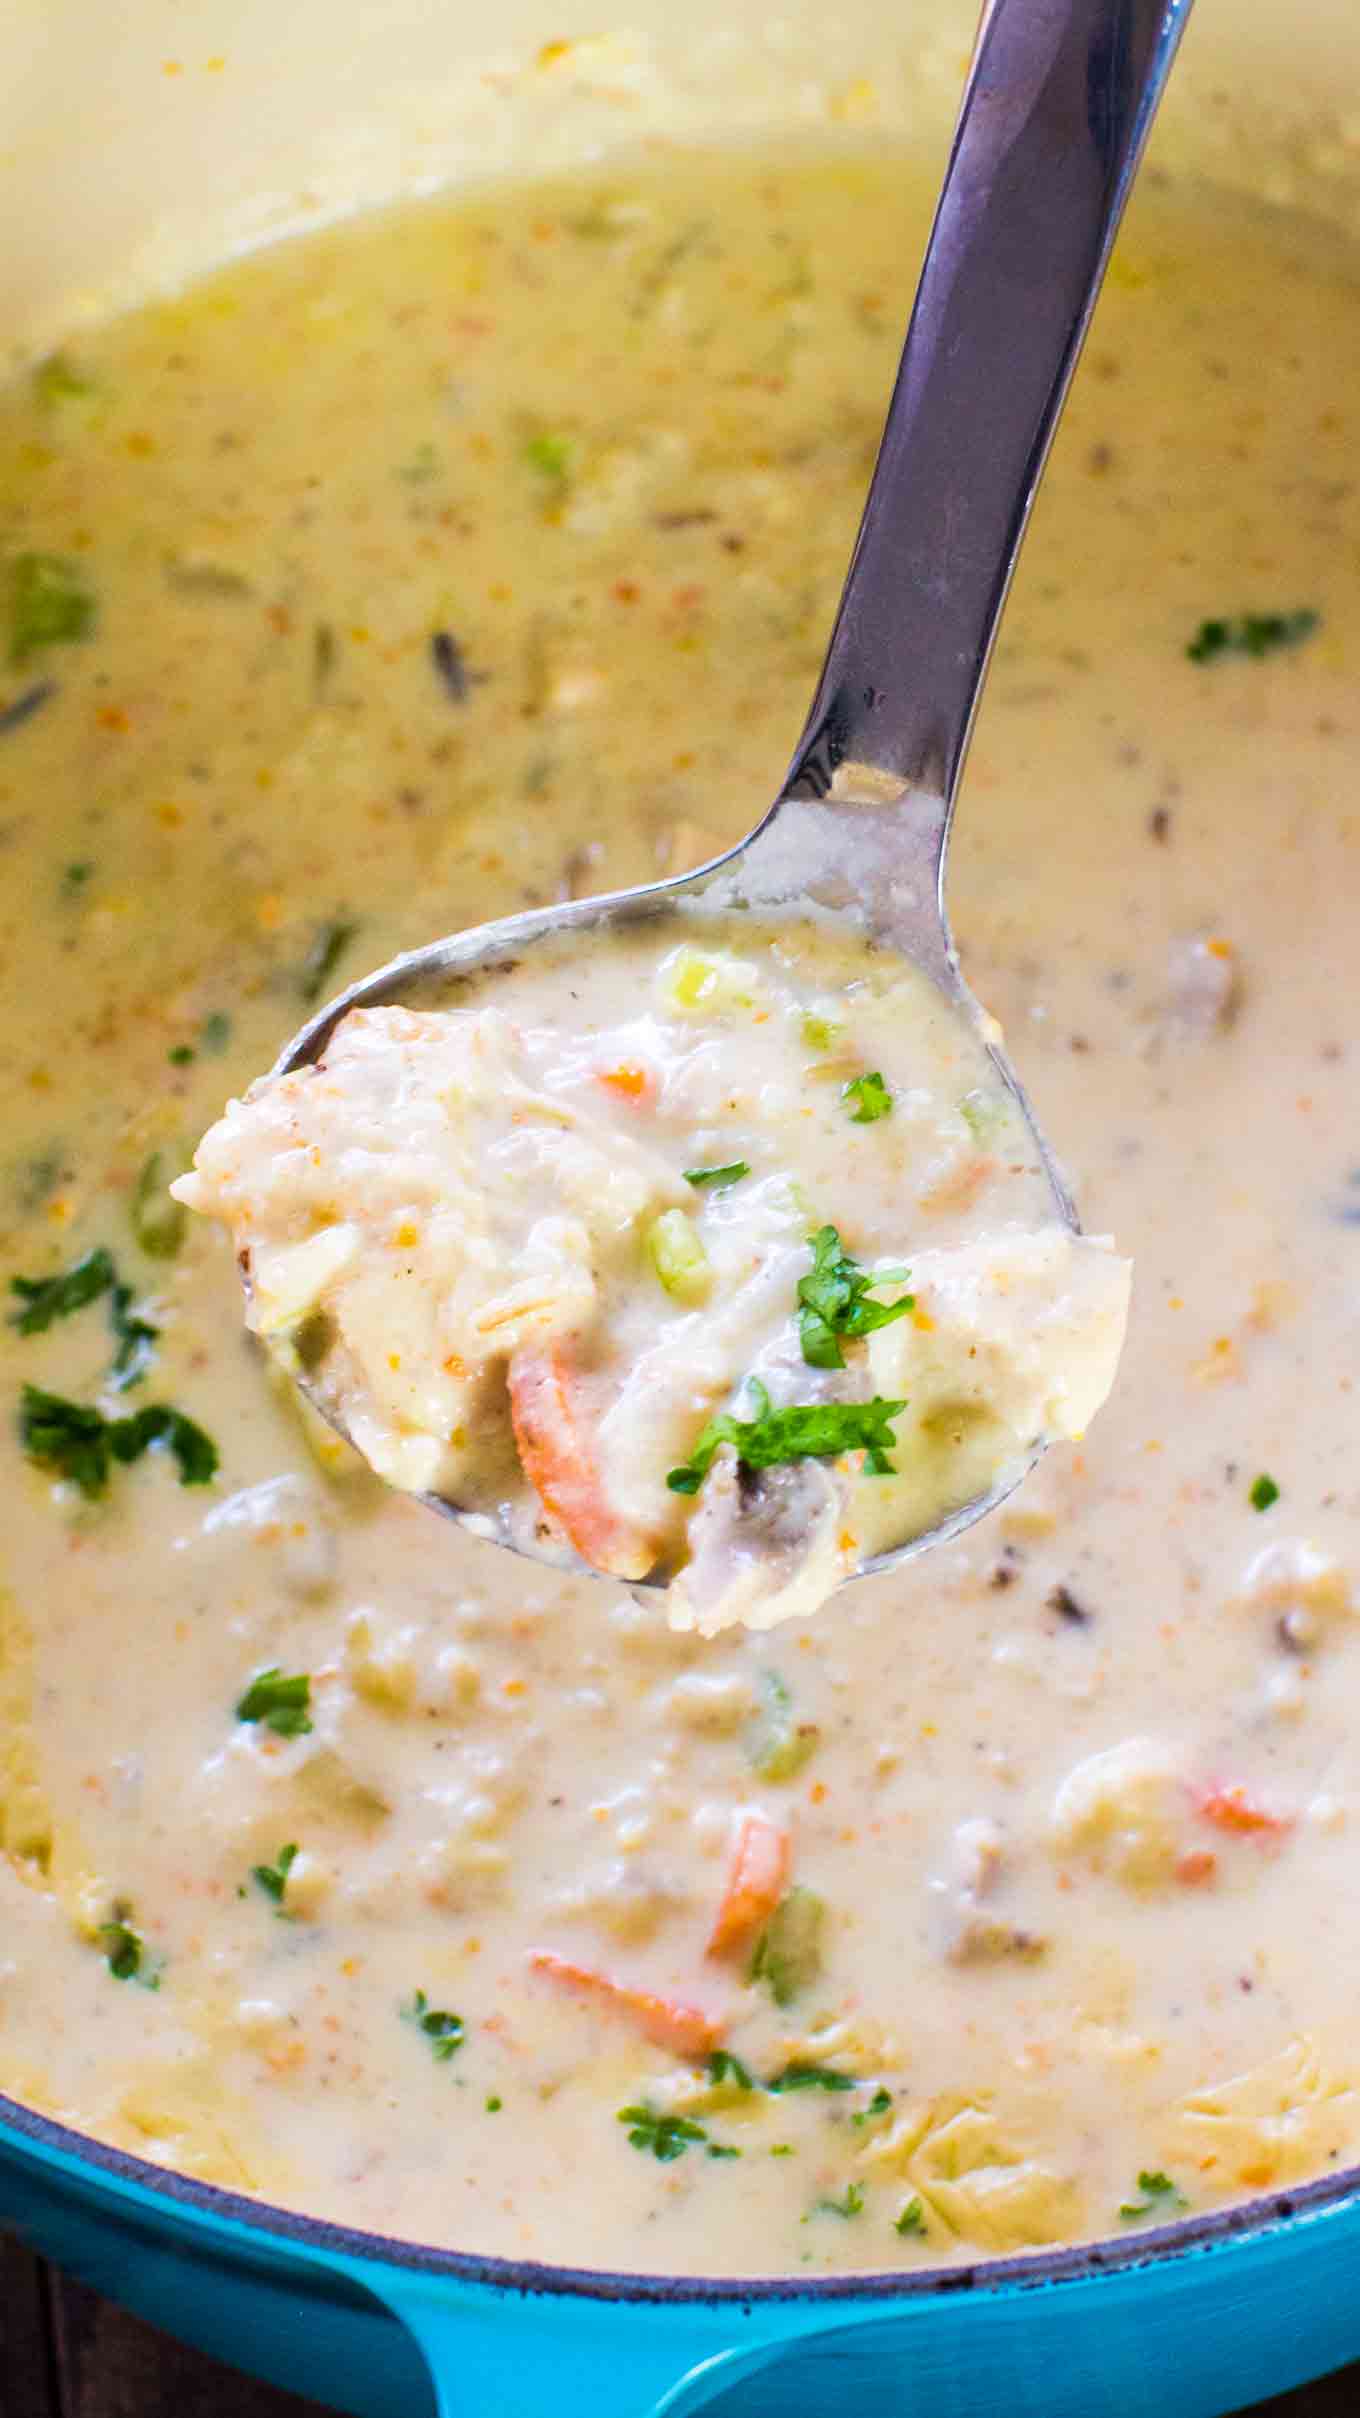 Panera Bread Soups Copycat recipe for their Panera Bread Chicken Wild Rice Soup. The easy homemade version of the chain's comforting, hearty and creamy soup.